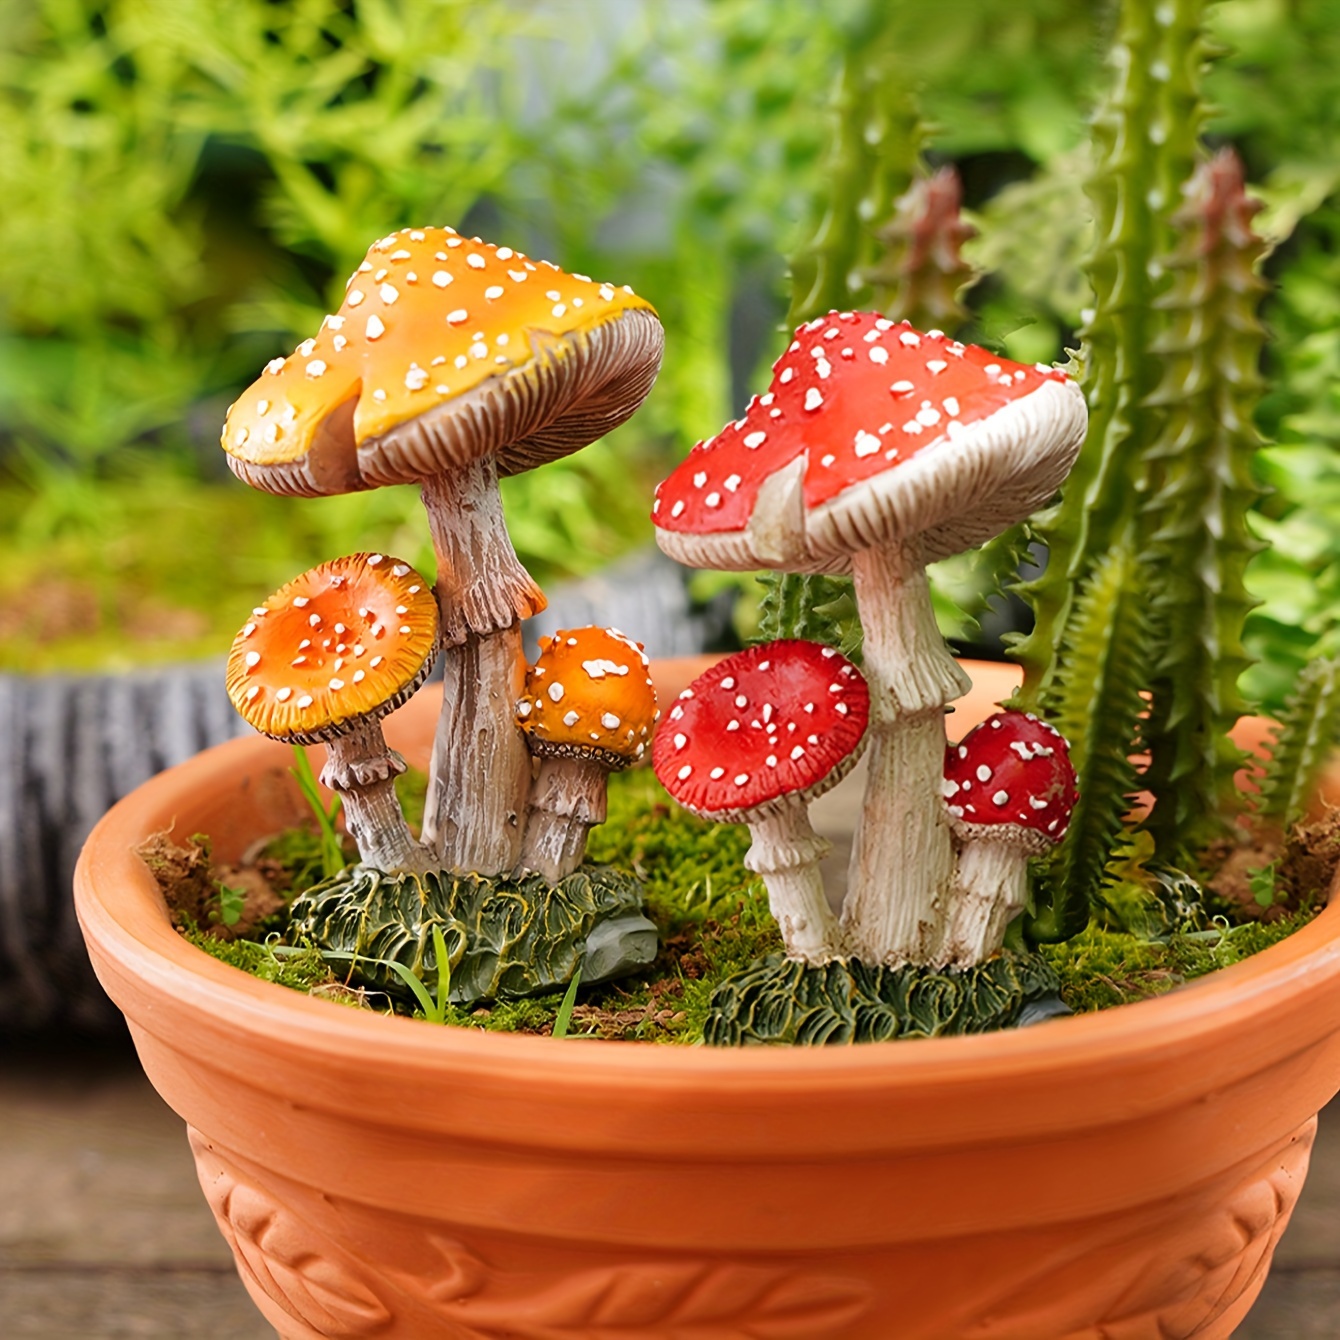 

1pc Hand-painted Resin Crafted Trio-dotted Mushrooms, Cute Miniature Figurine, Rustic Garden Decor Accessory For Potted Plants & Fairy Scenery